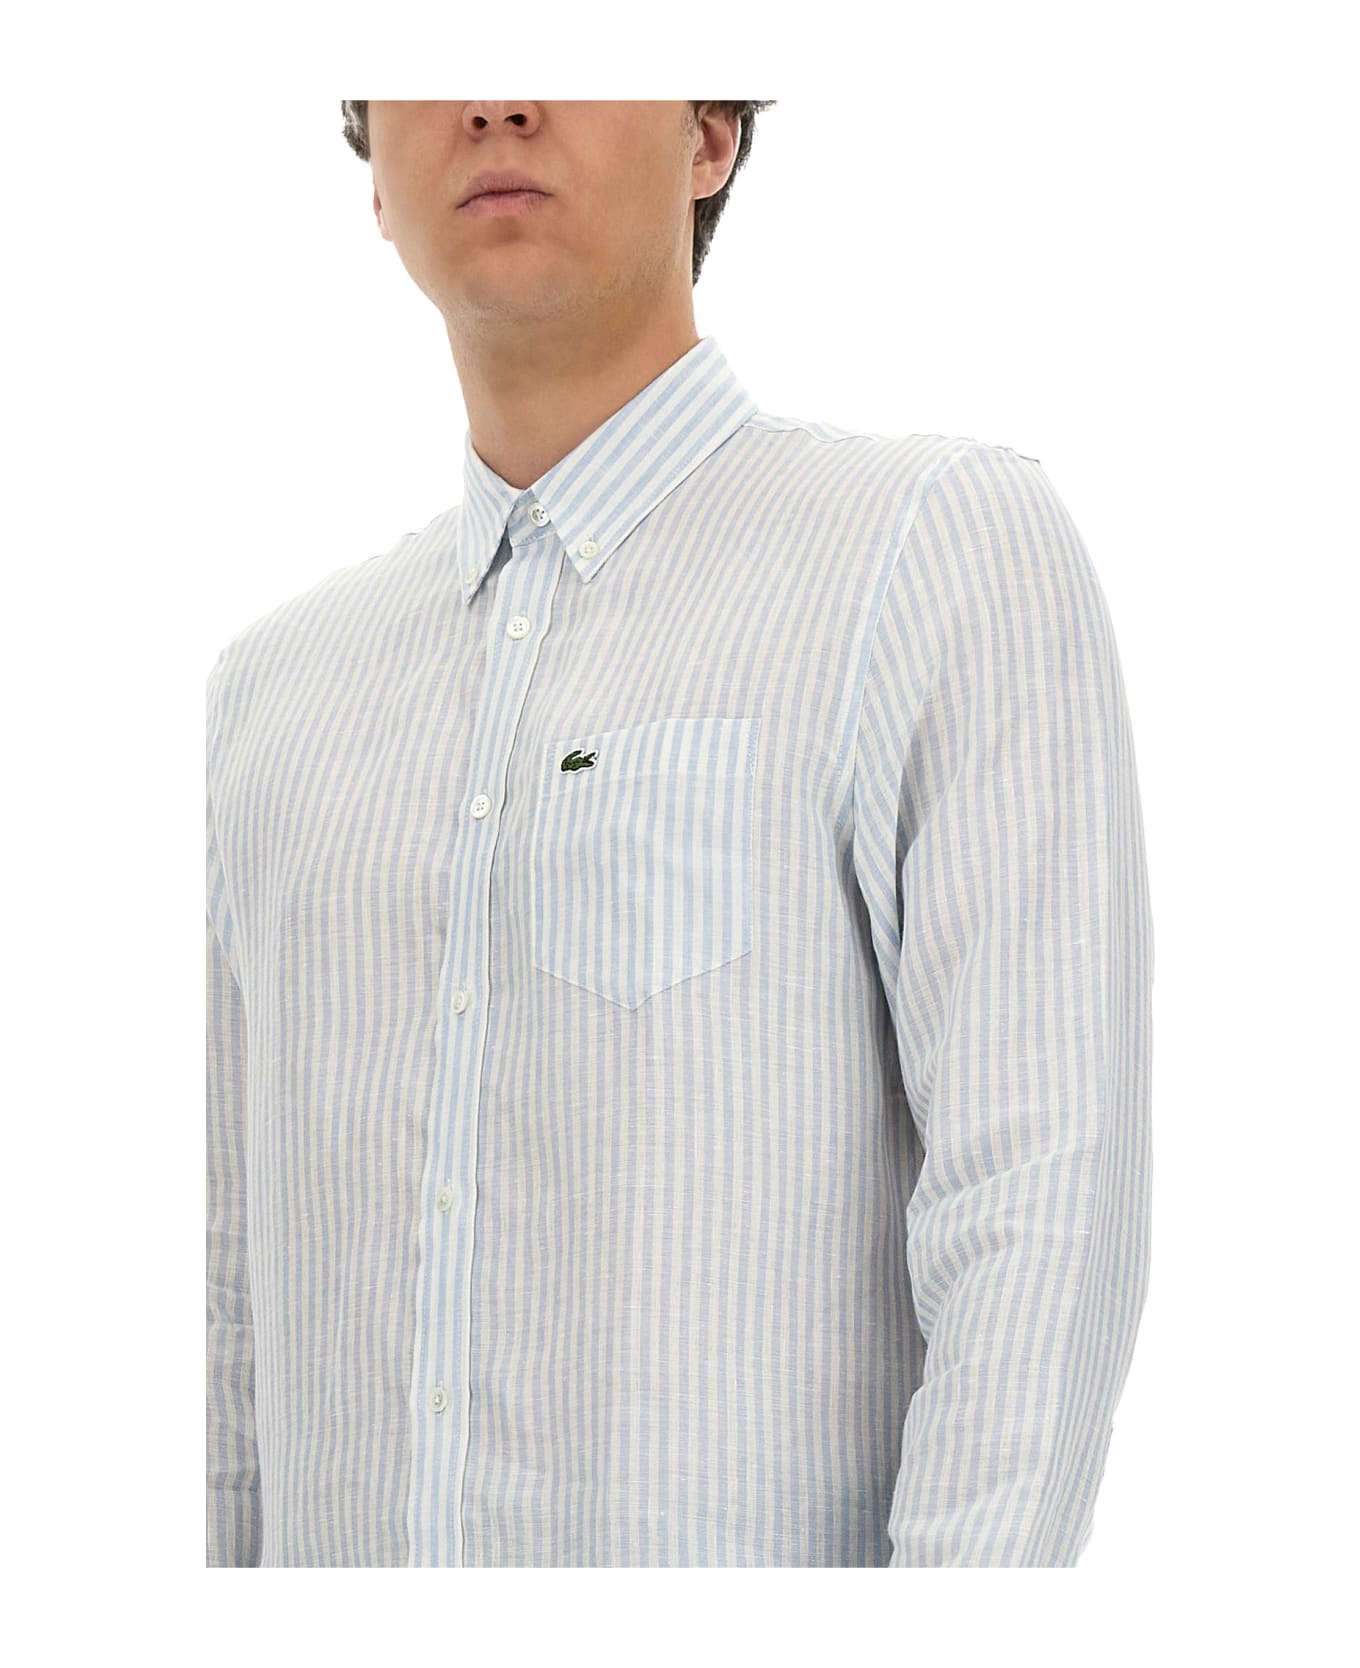 Lacoste Shirt With Logo シャツ